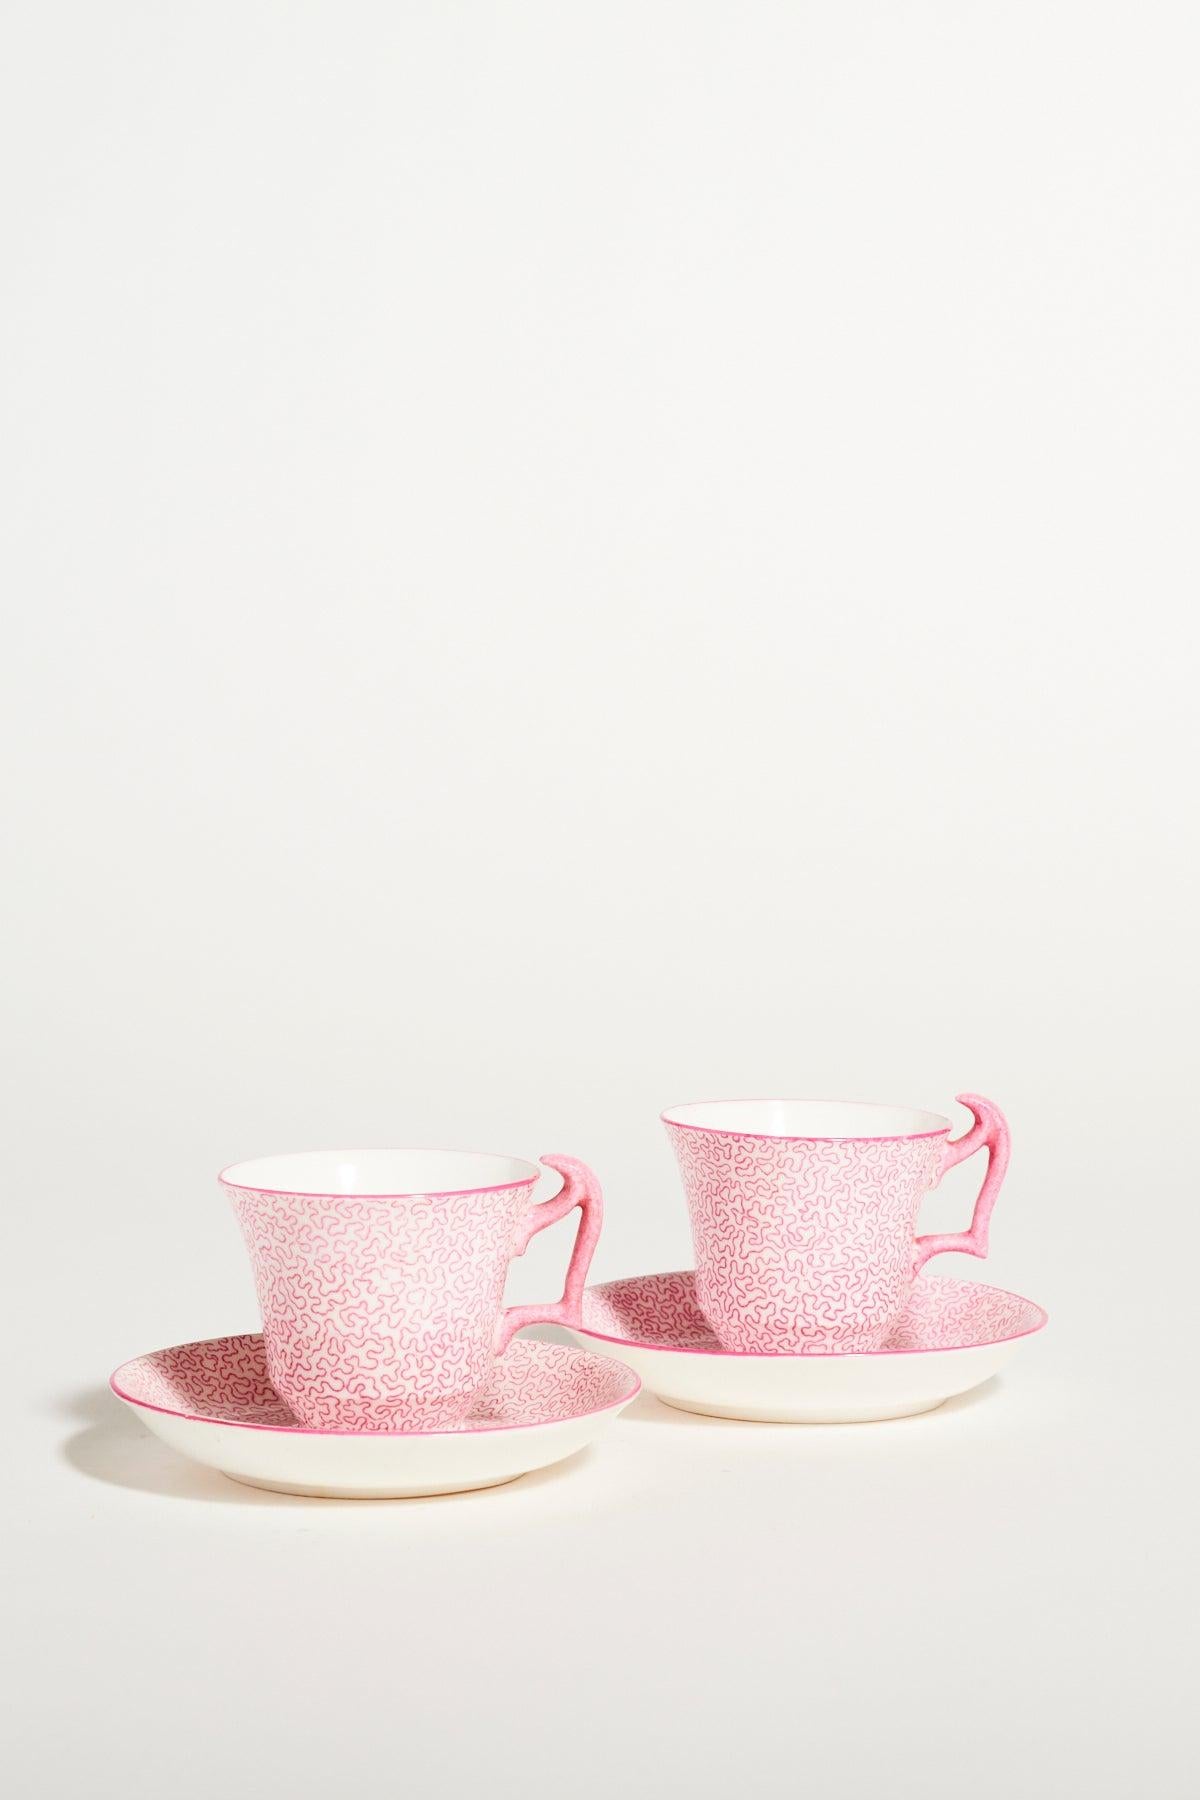 Pair of rare Crown Staffordshire cups in pink squiggle pattern, features elaborate 'London' style handle.